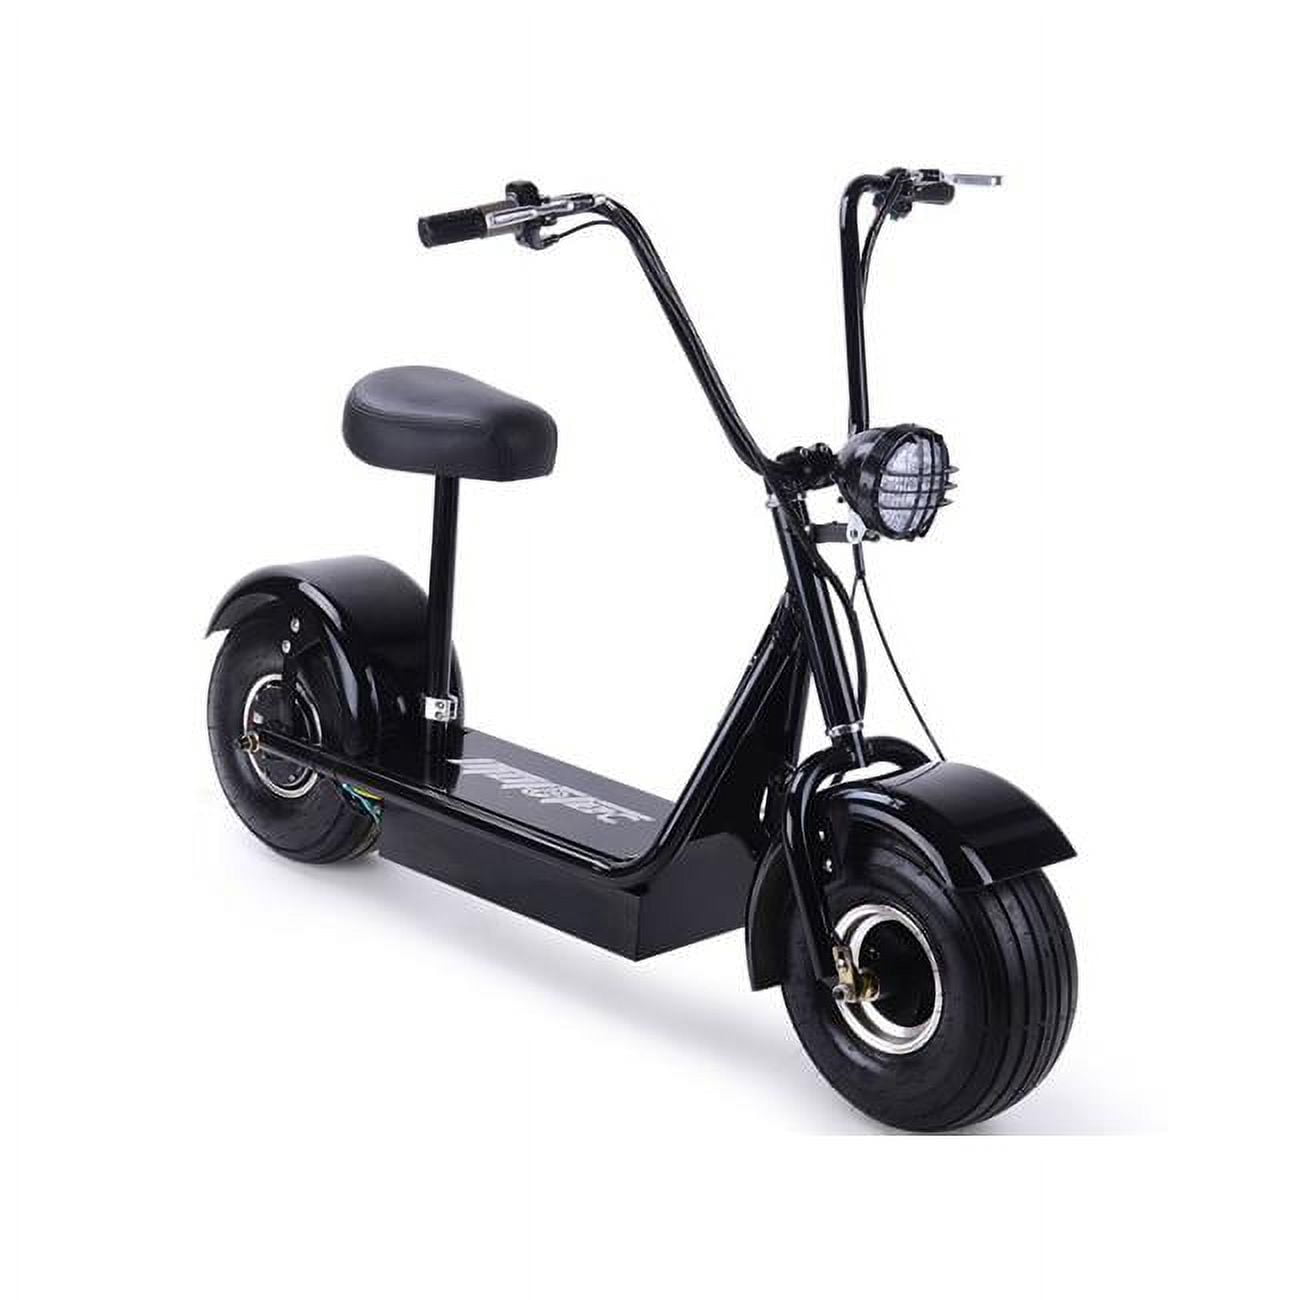 Picture of MotoTec MT-FatBoy-500 48V FatBoy Electric Scooter, 500W